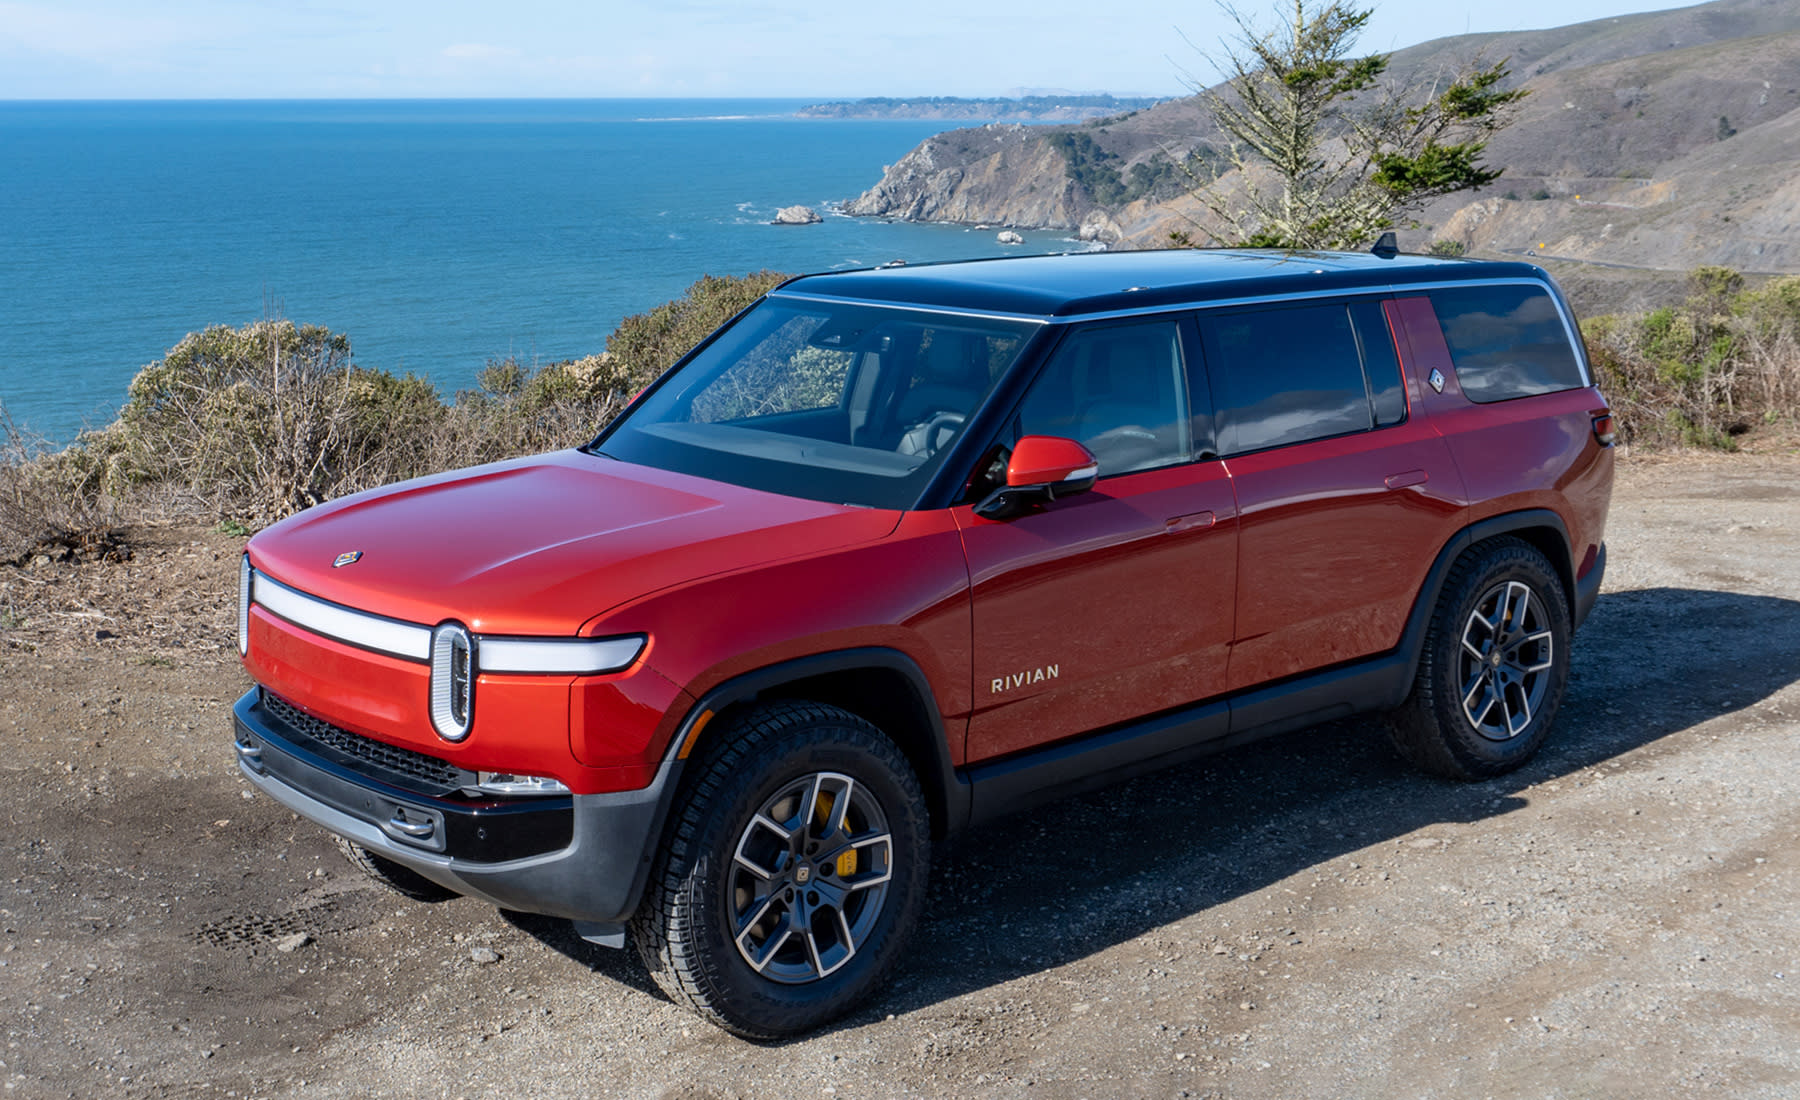 The Rivian R1S is an impressive electric SUV meant for adventures | Engadget